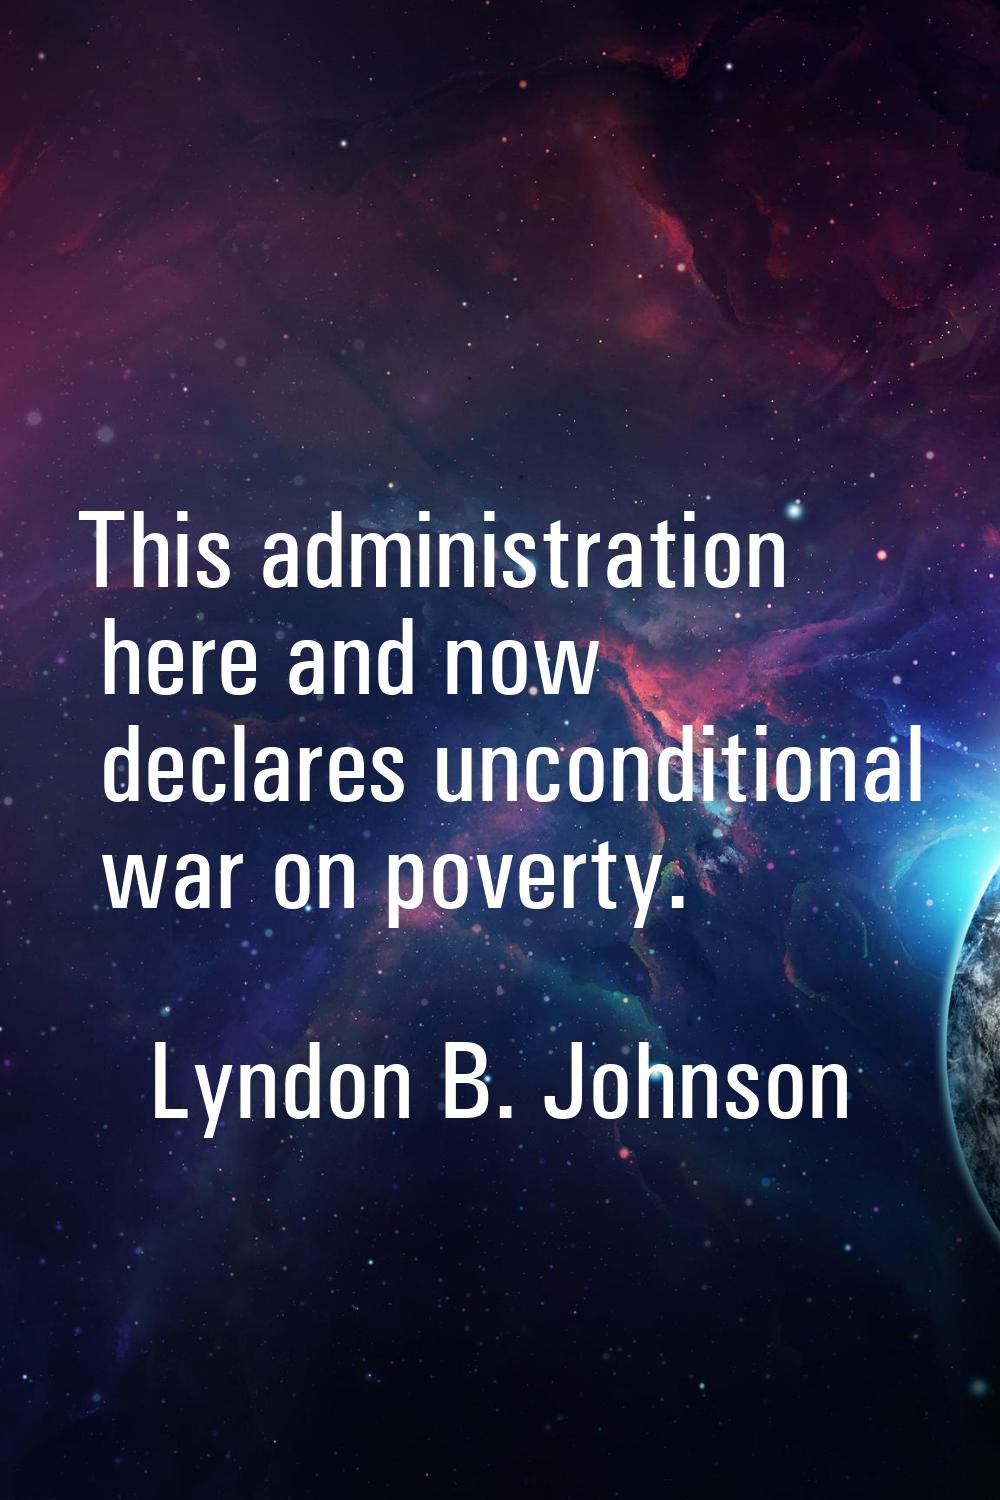 This administration here and now declares unconditional war on poverty.